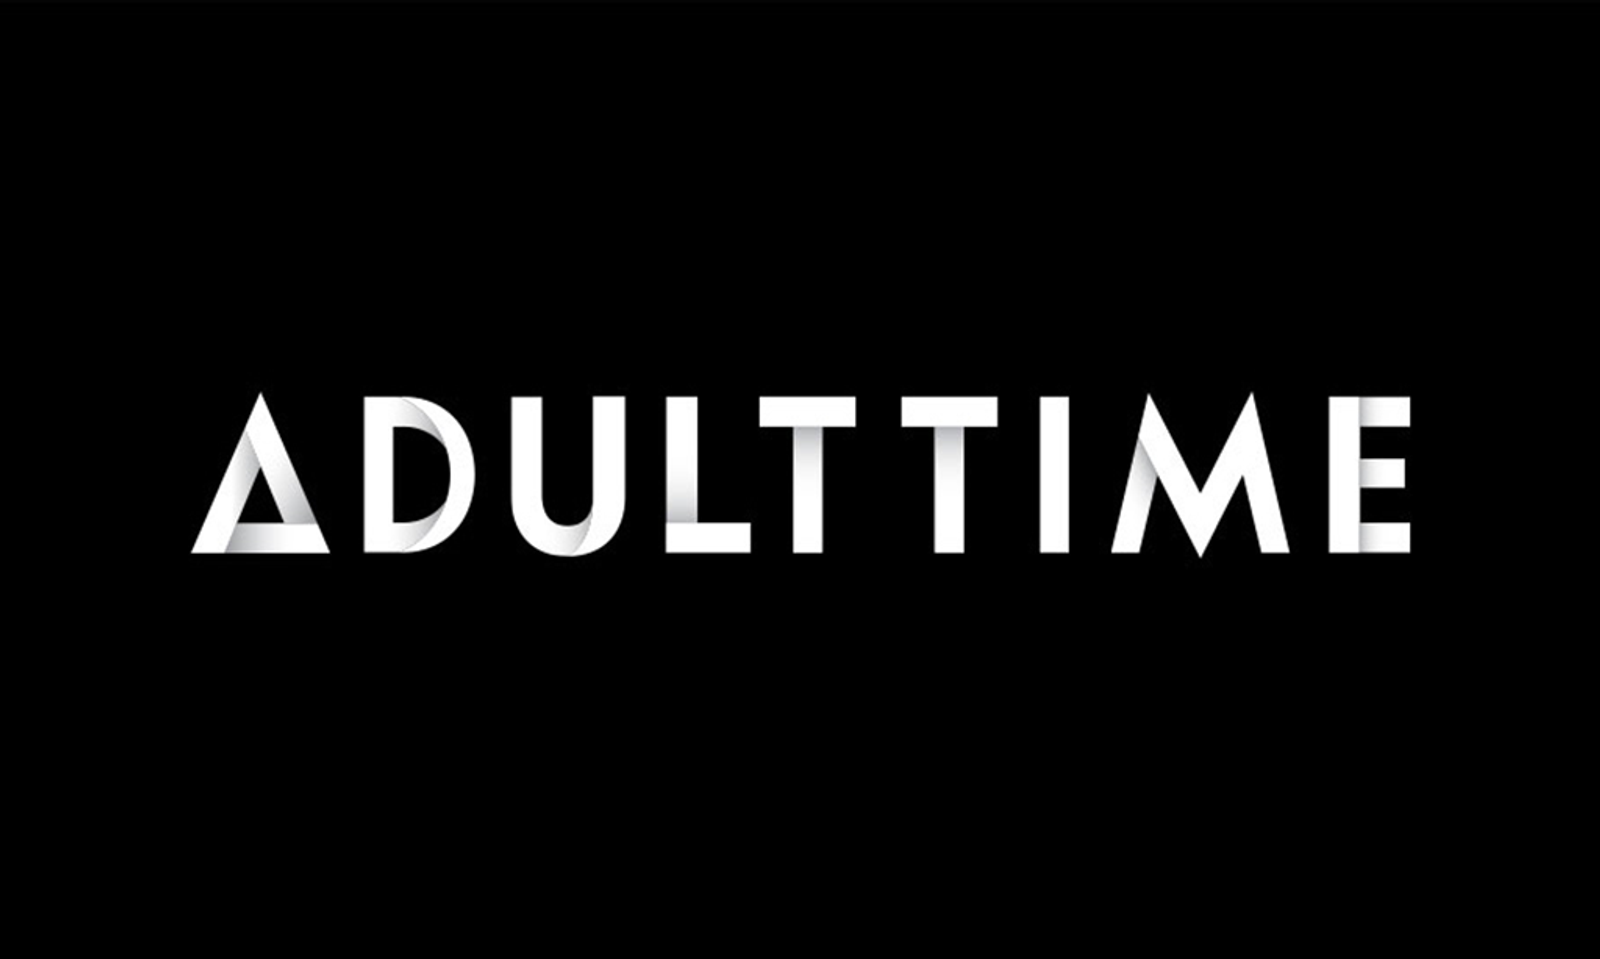 Adult Time Now Has Virtually Produced Content, Relief Program